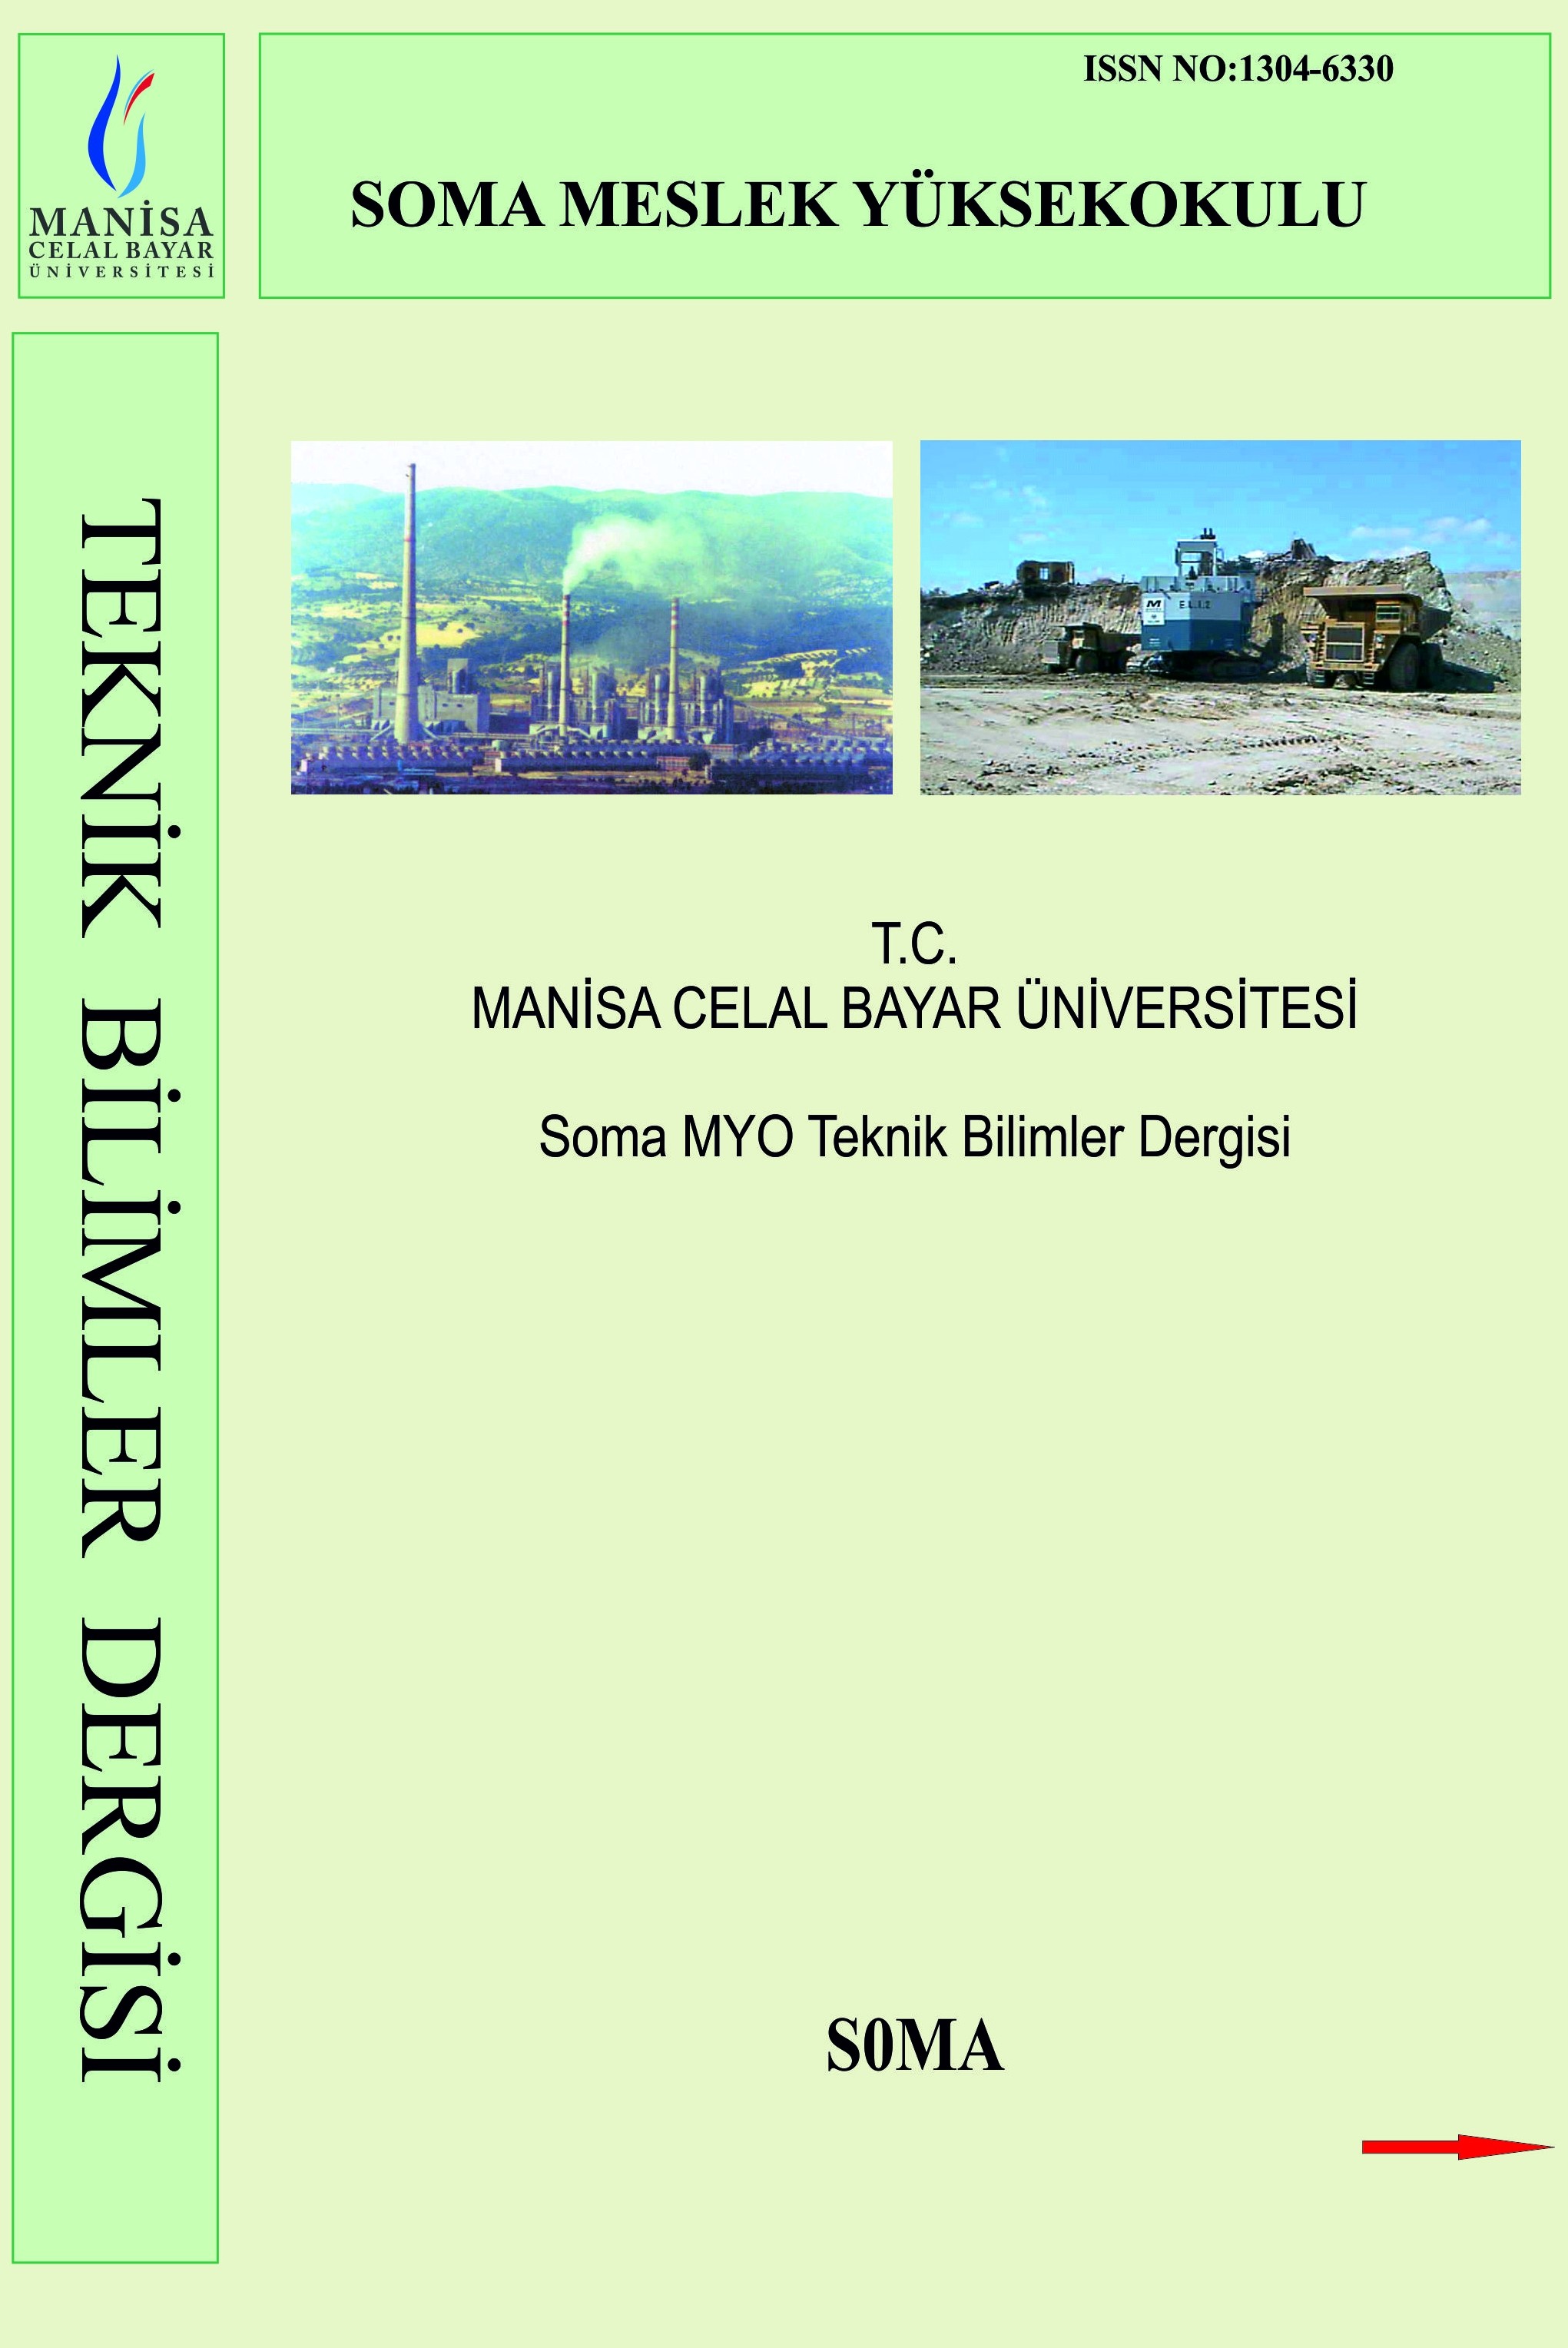 Soma Vocational School Technical Sciences Journal